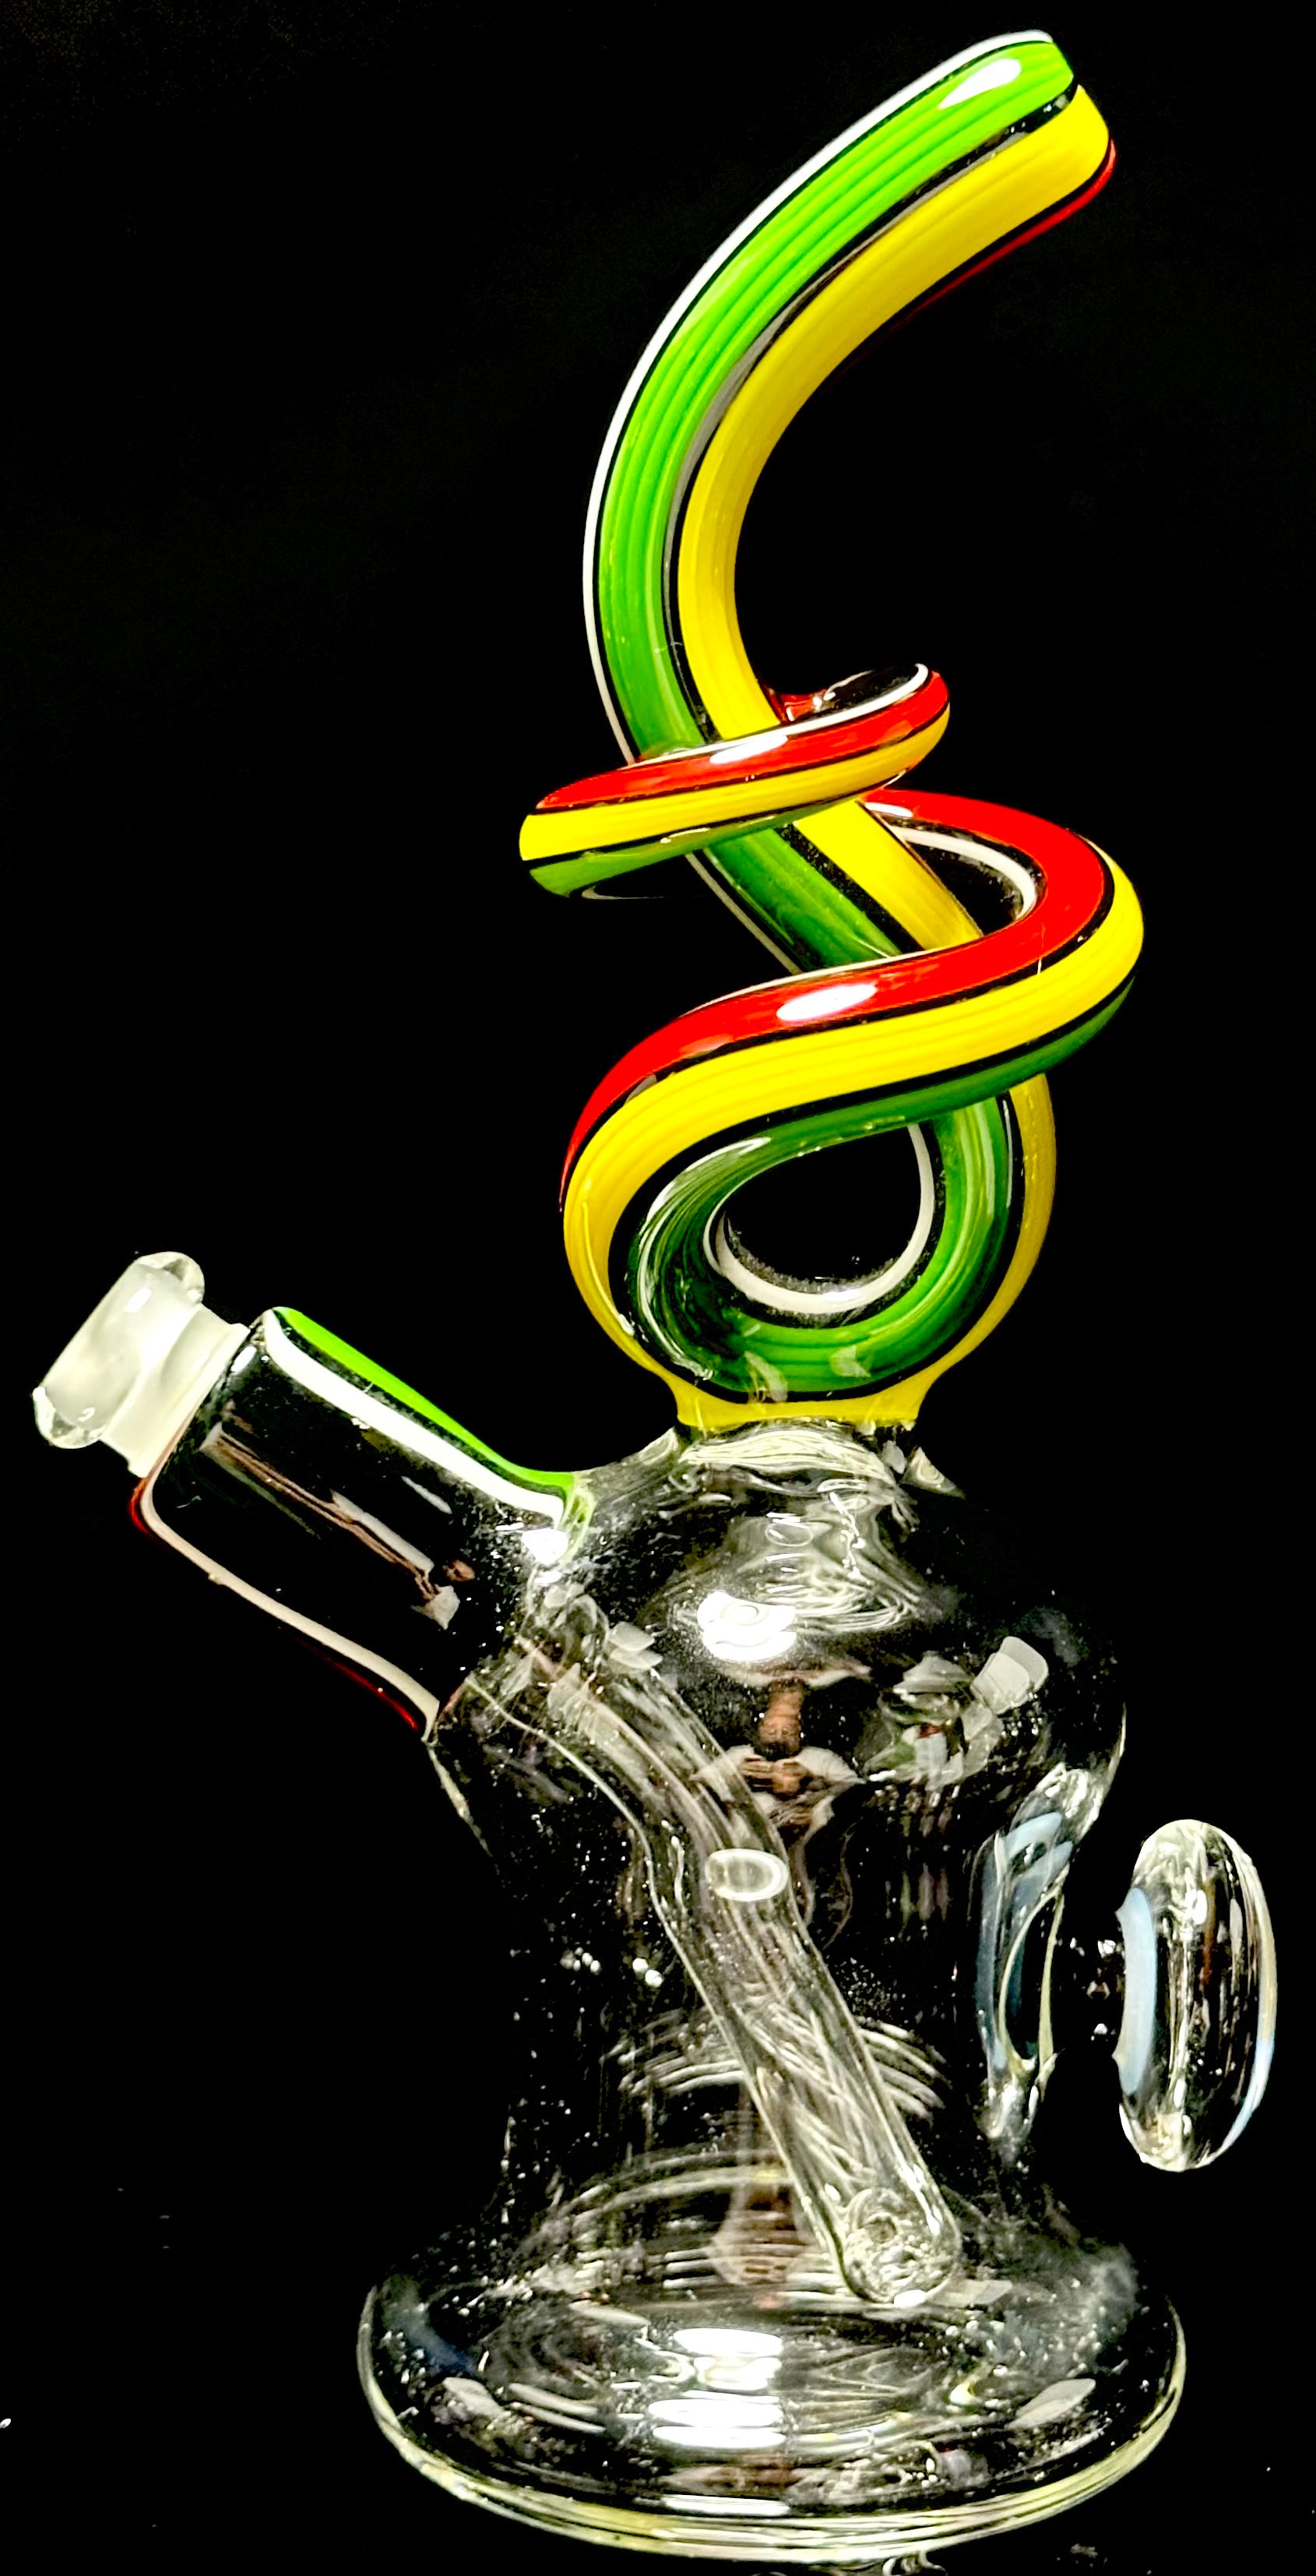 Cambria Glass Rasta 10mm Linework Swirl Rig w/ Worked Joint